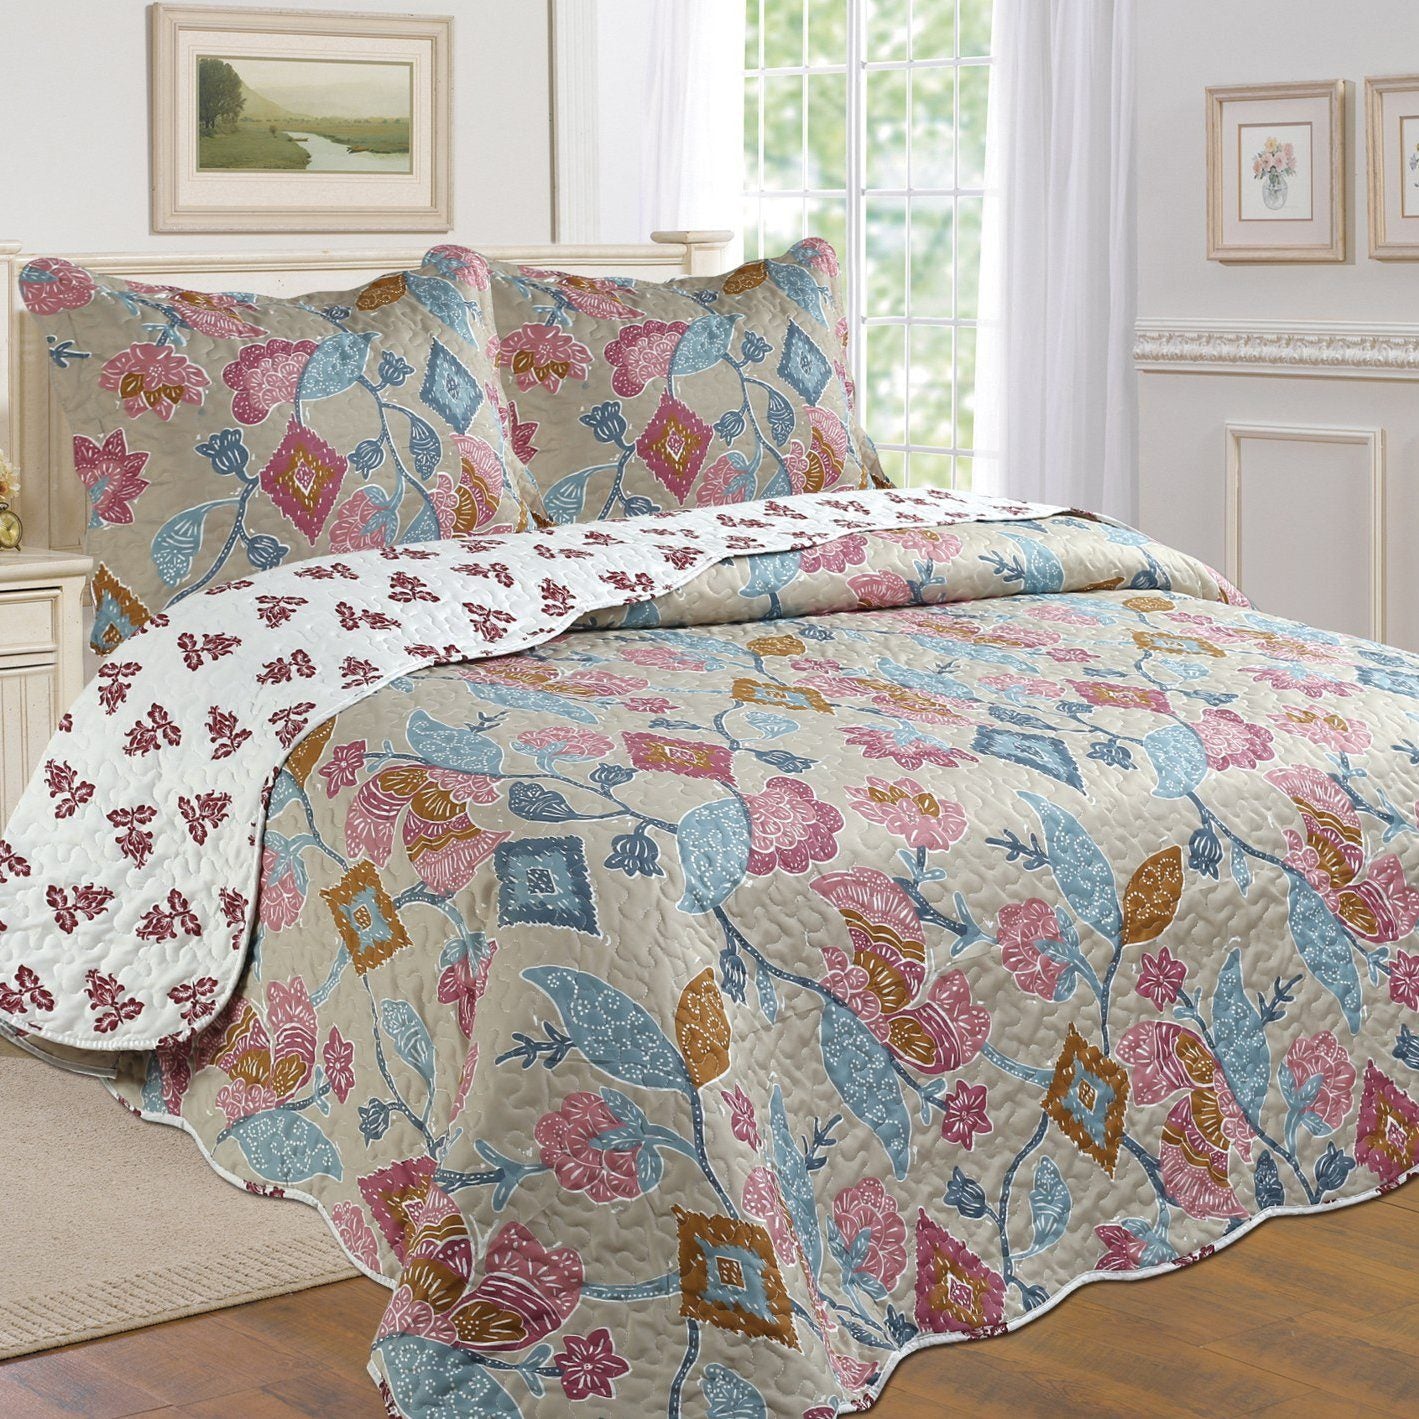 Tradition Premium Printed Reversible Quilt Sets / Floral / Full/Queen